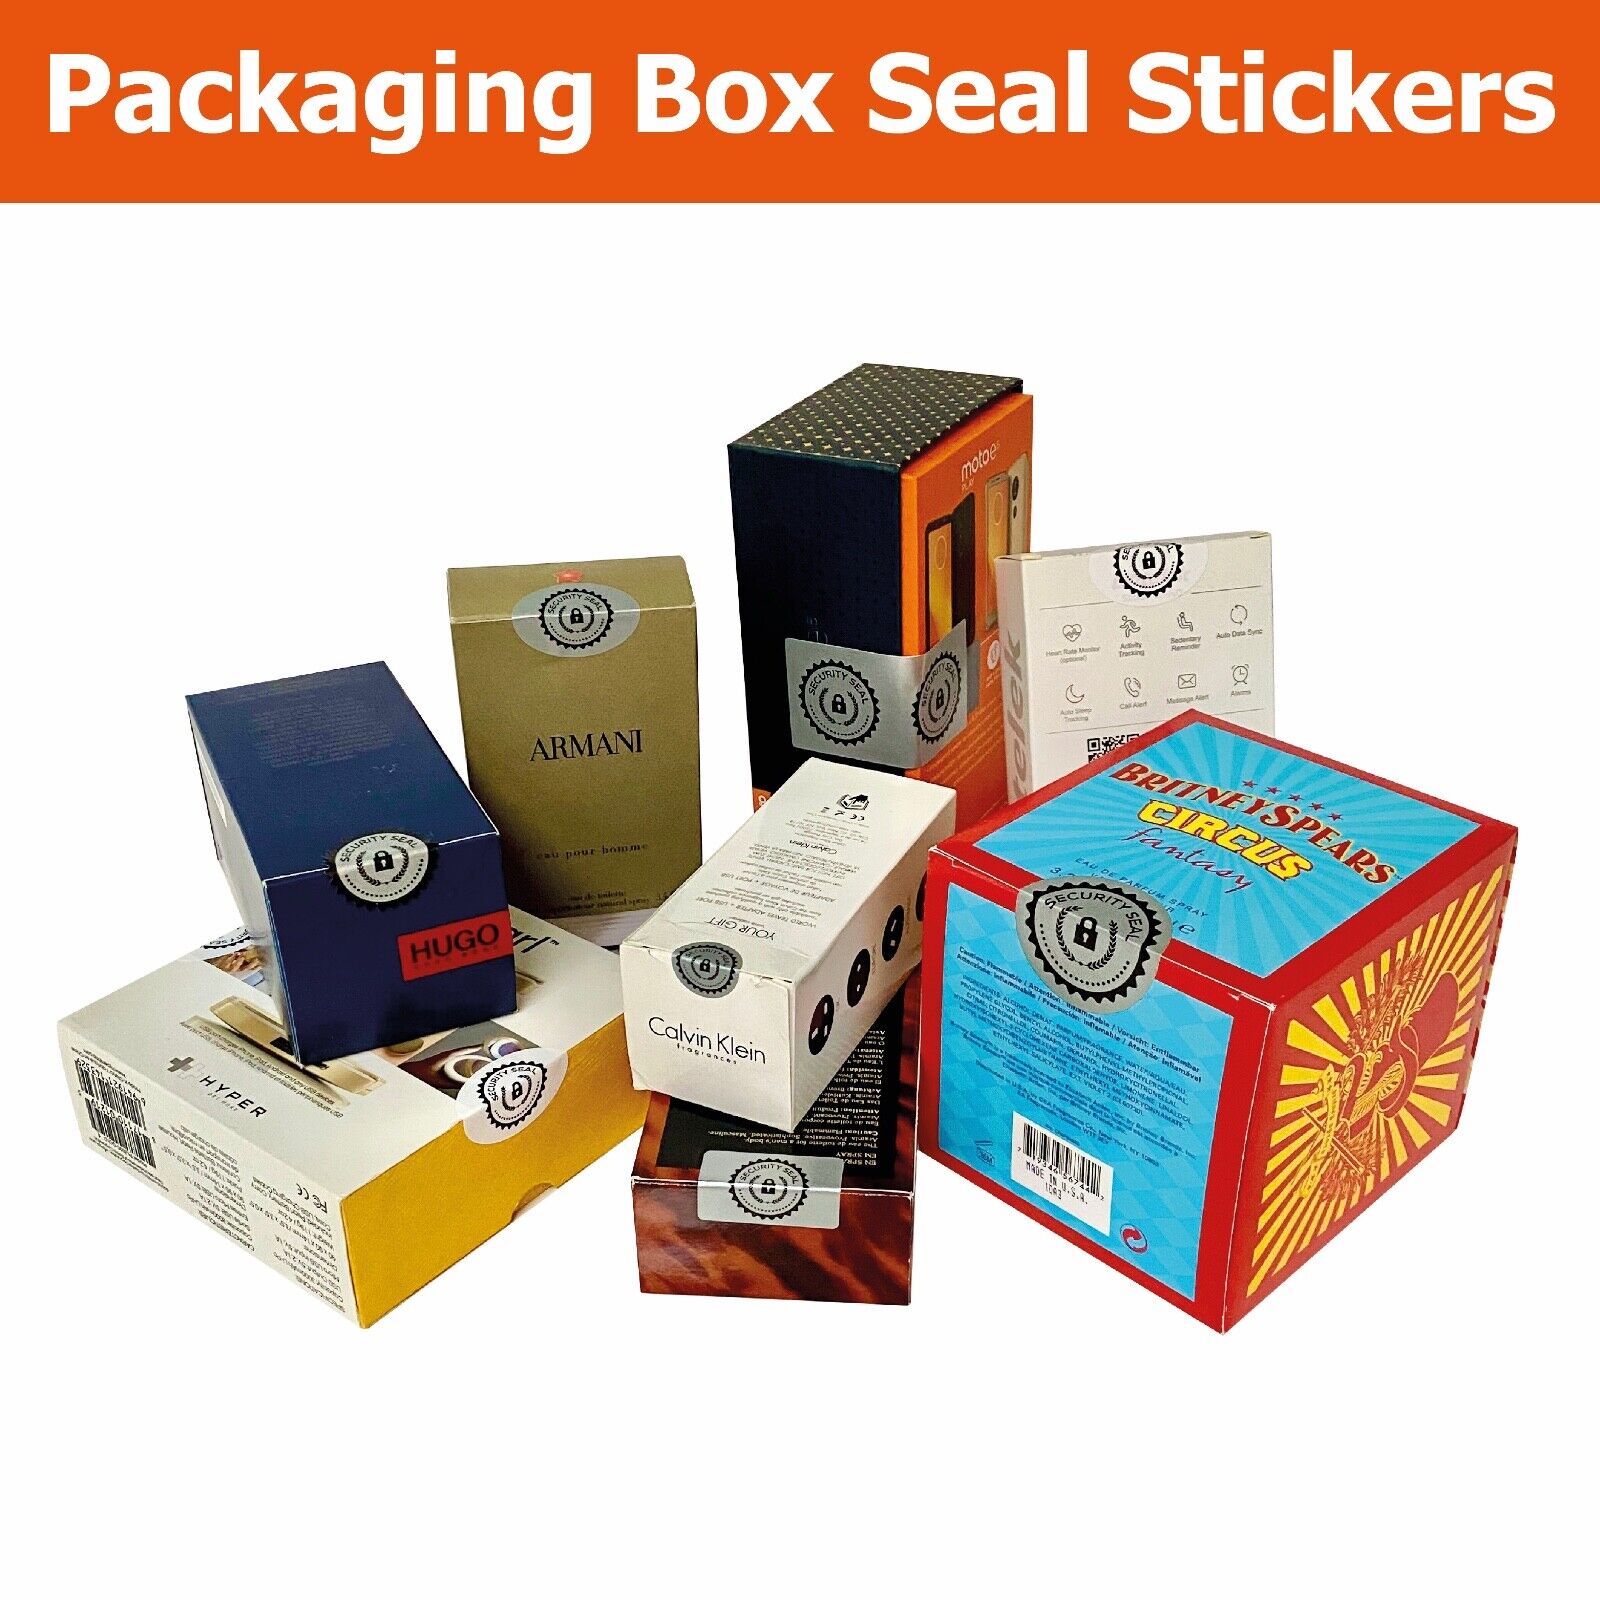 Jiffy Bag / Envelope / Letter Security Seals Choose Your Sticker Size Oryginalne tanie